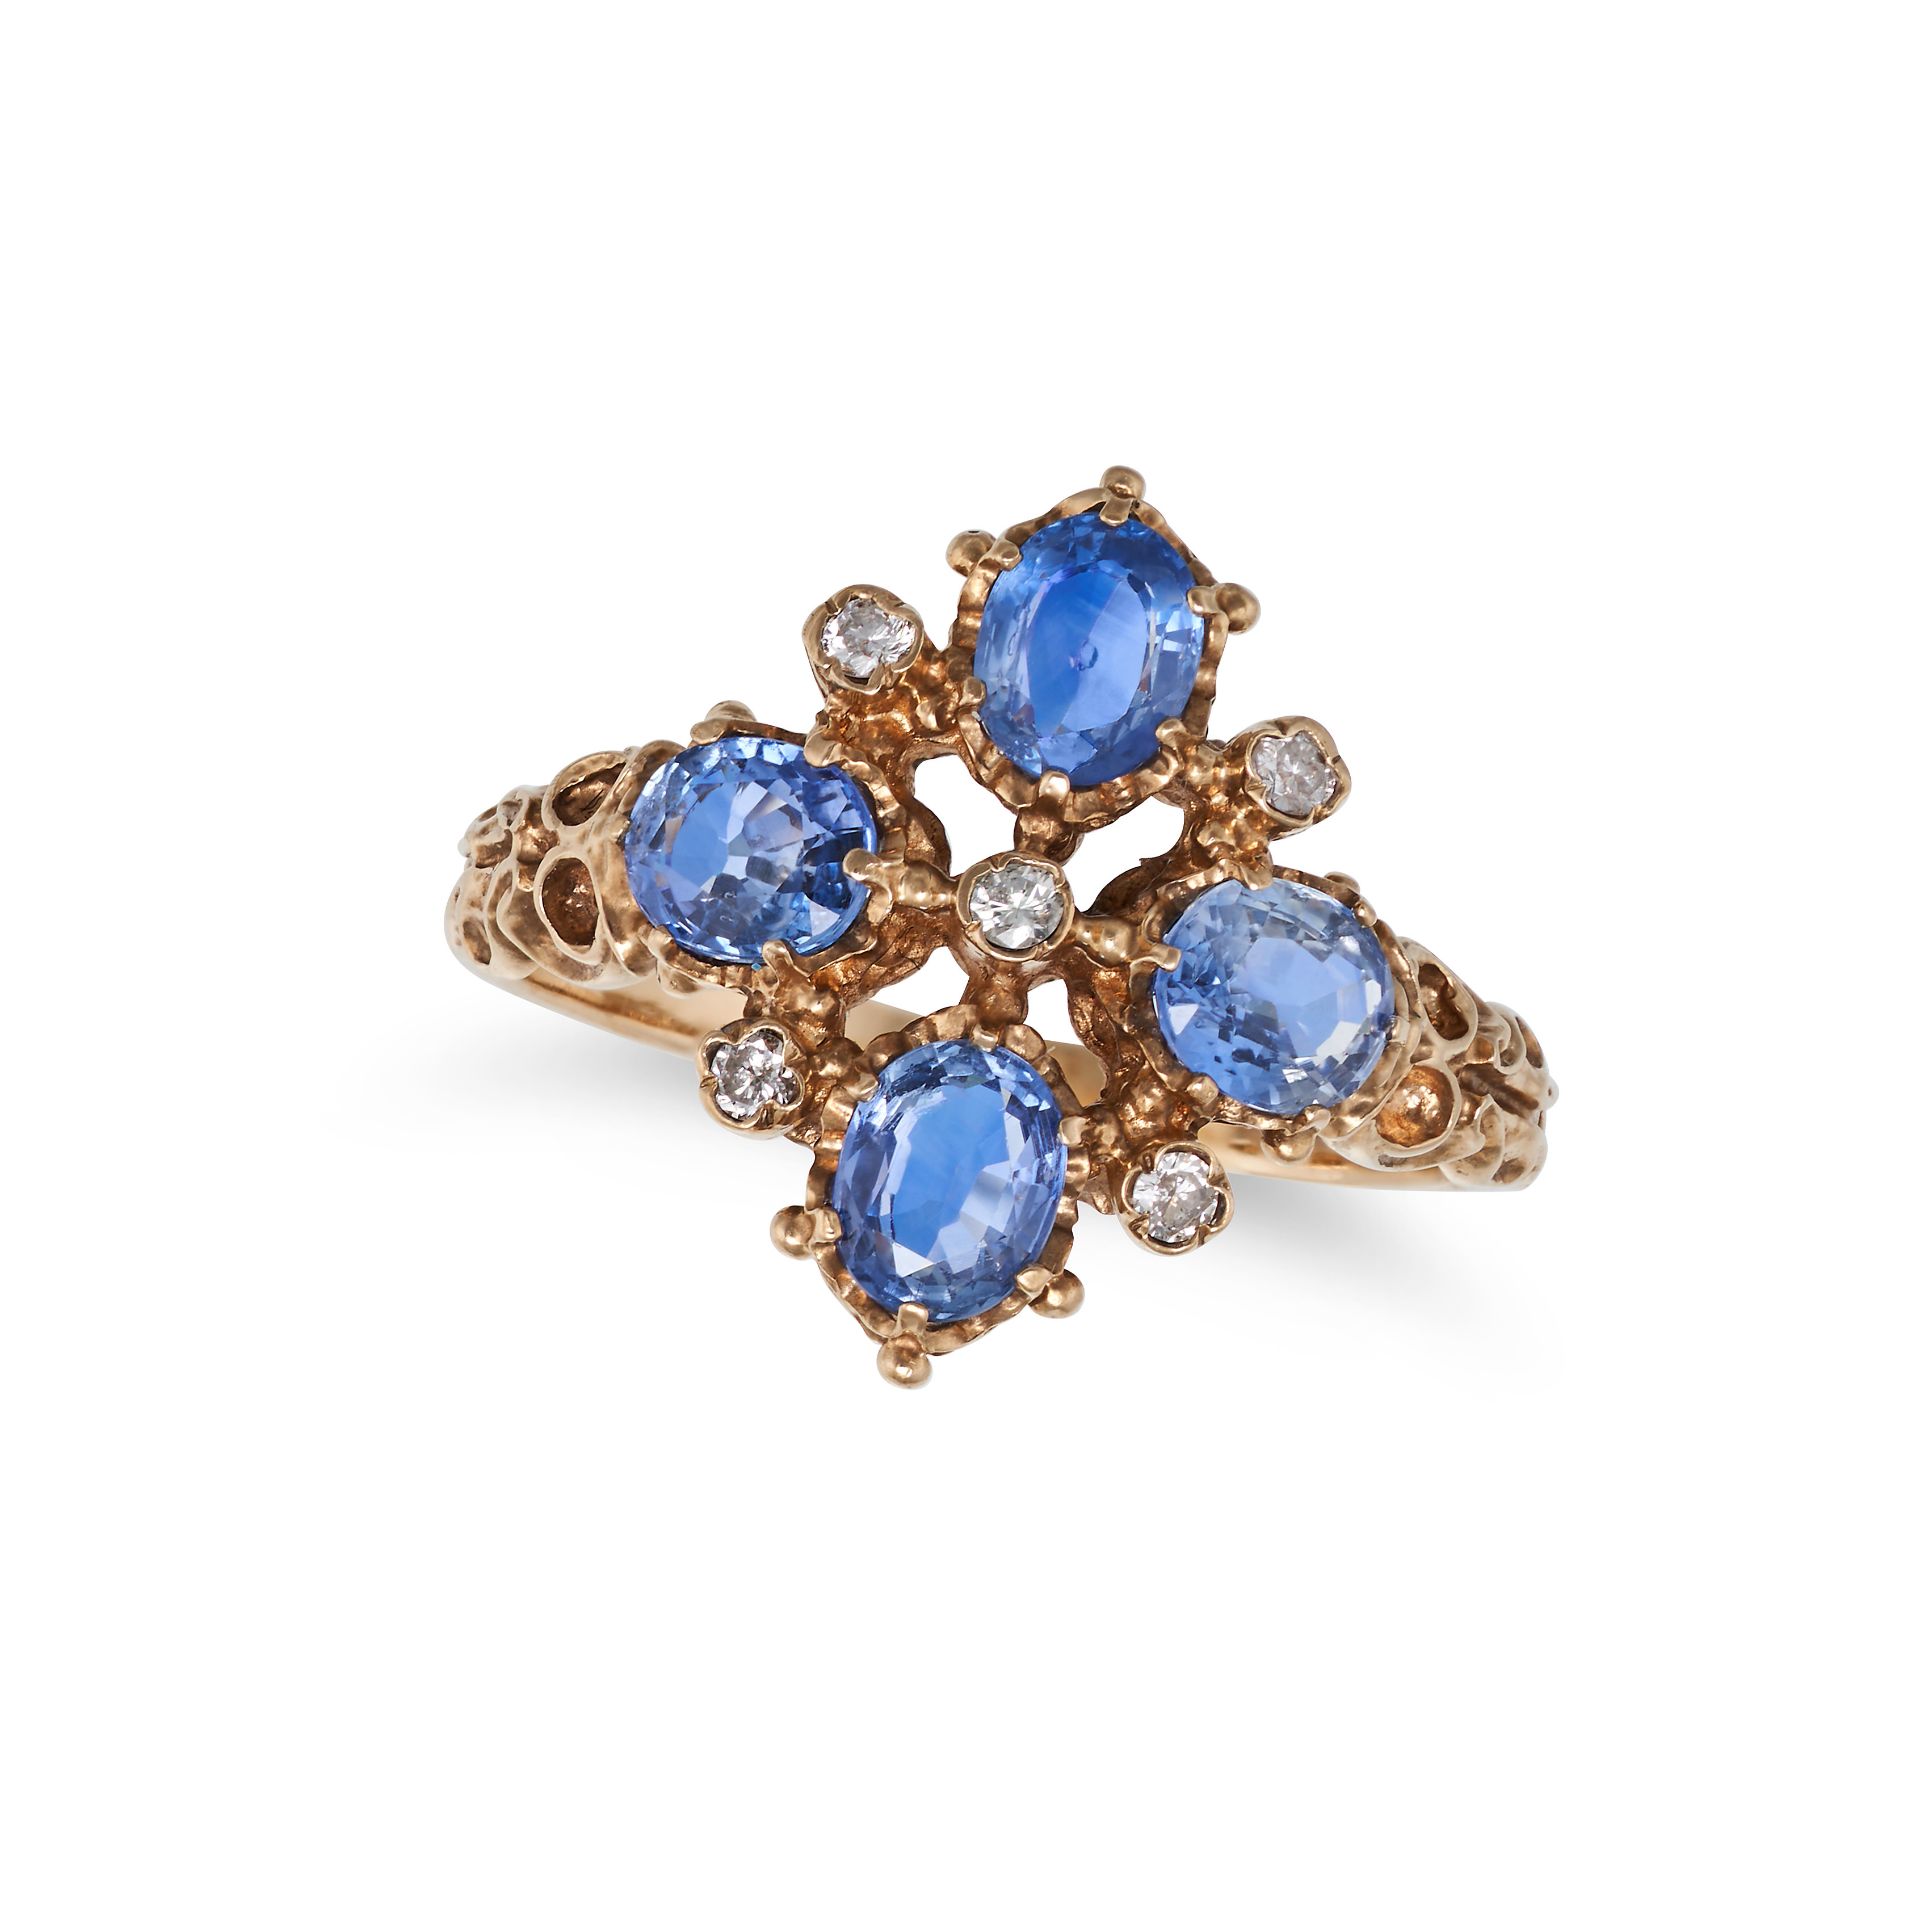 NO RESERVE - A VINTAGE SAPPHIRE AND DIAMOND RING in 9ct yellow gold, set with four oval cut sapph...